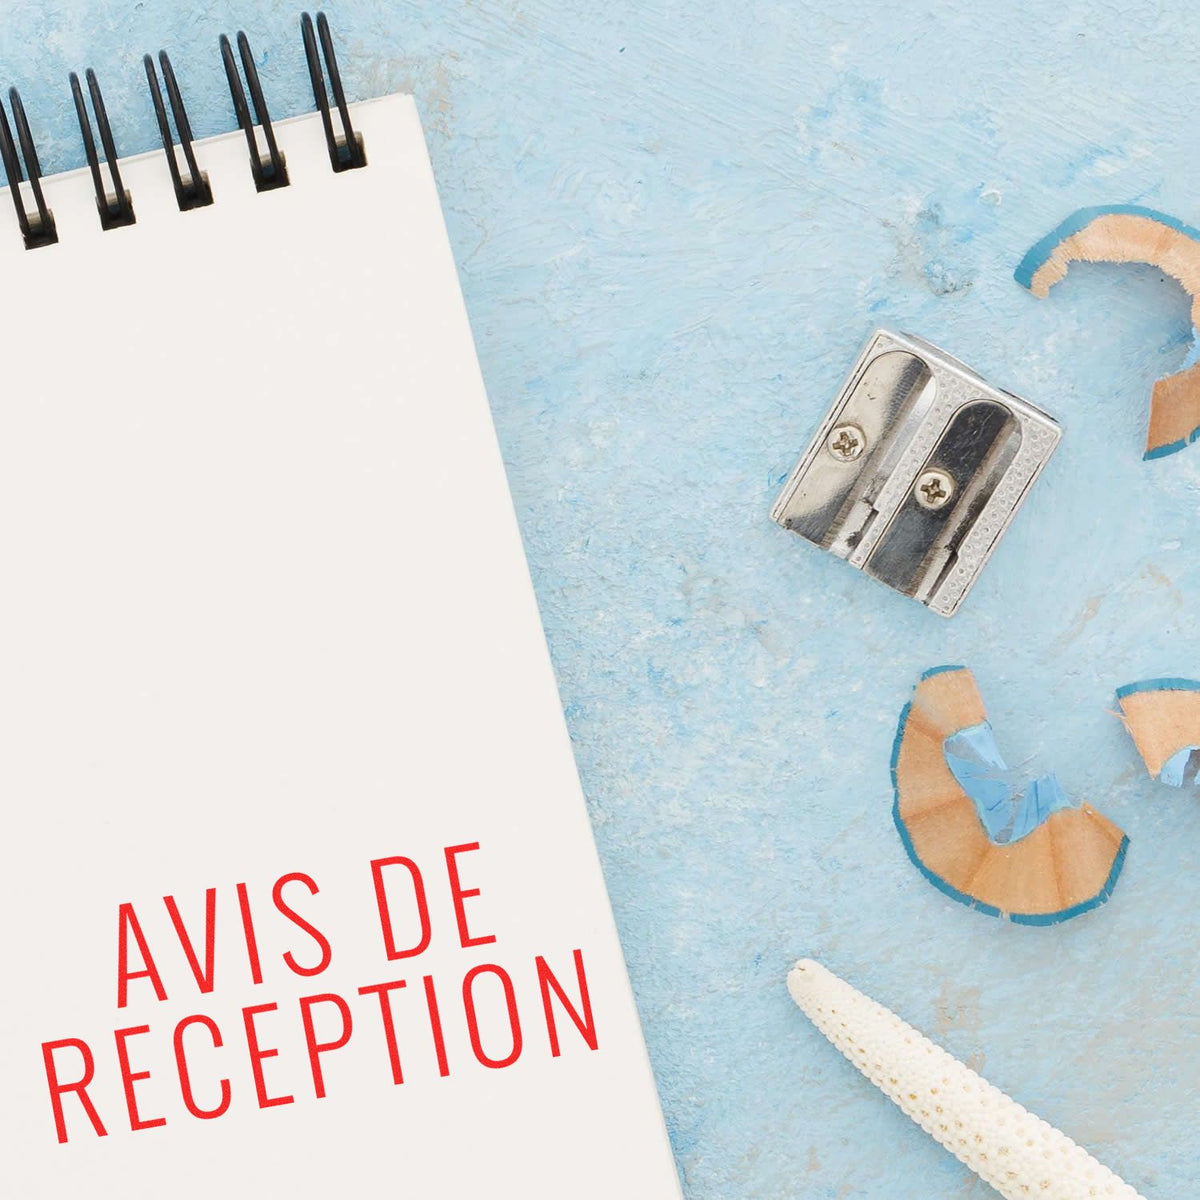 Large Pre-Inked Avis De Receiption Stamp In Use Photo